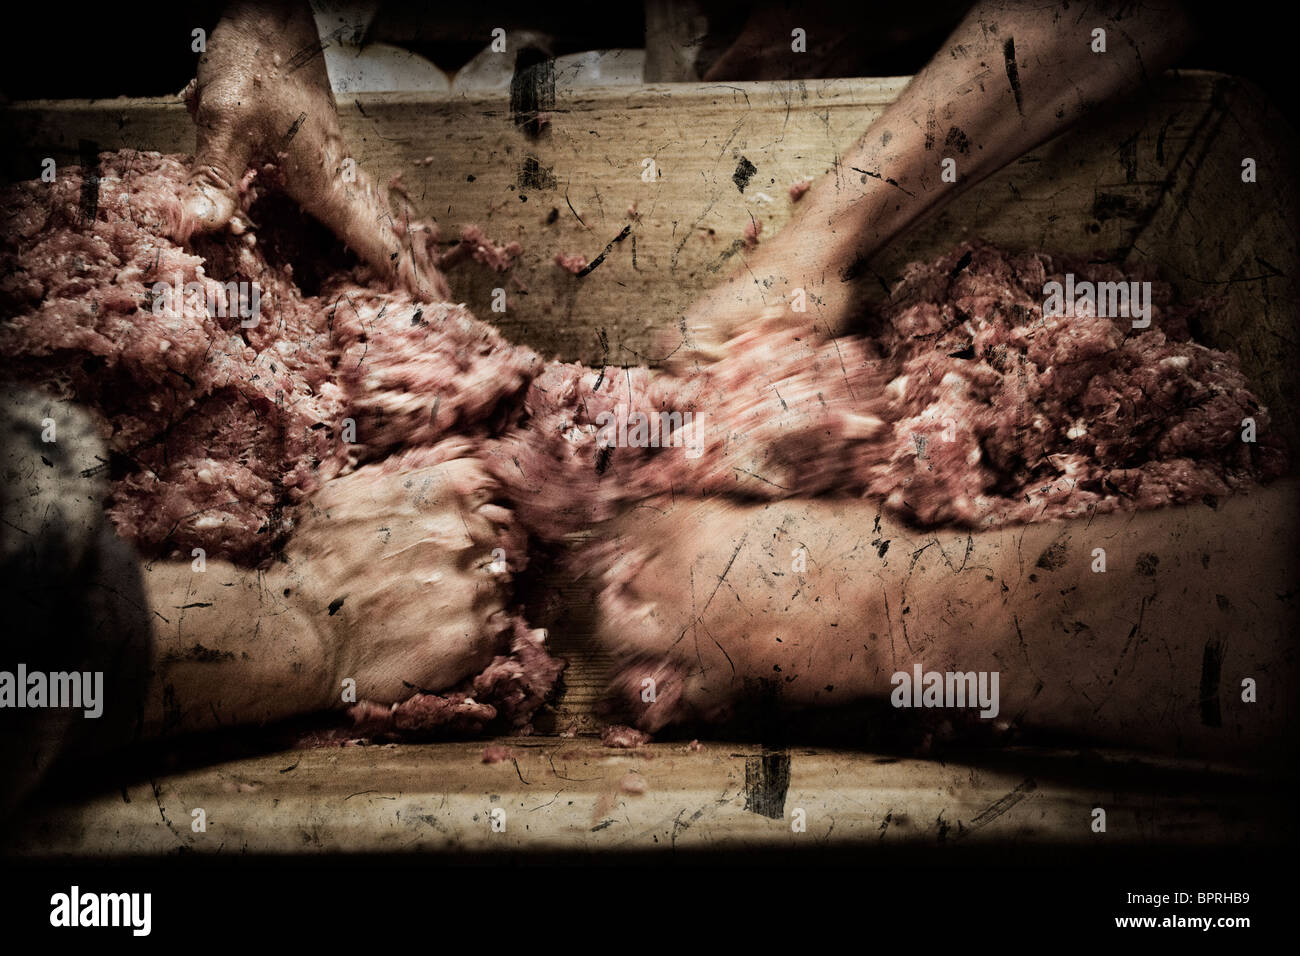 Two people mixing the meat of a pig with salt and pepper in Pirineos, Lerida, Spain. Stock Photo